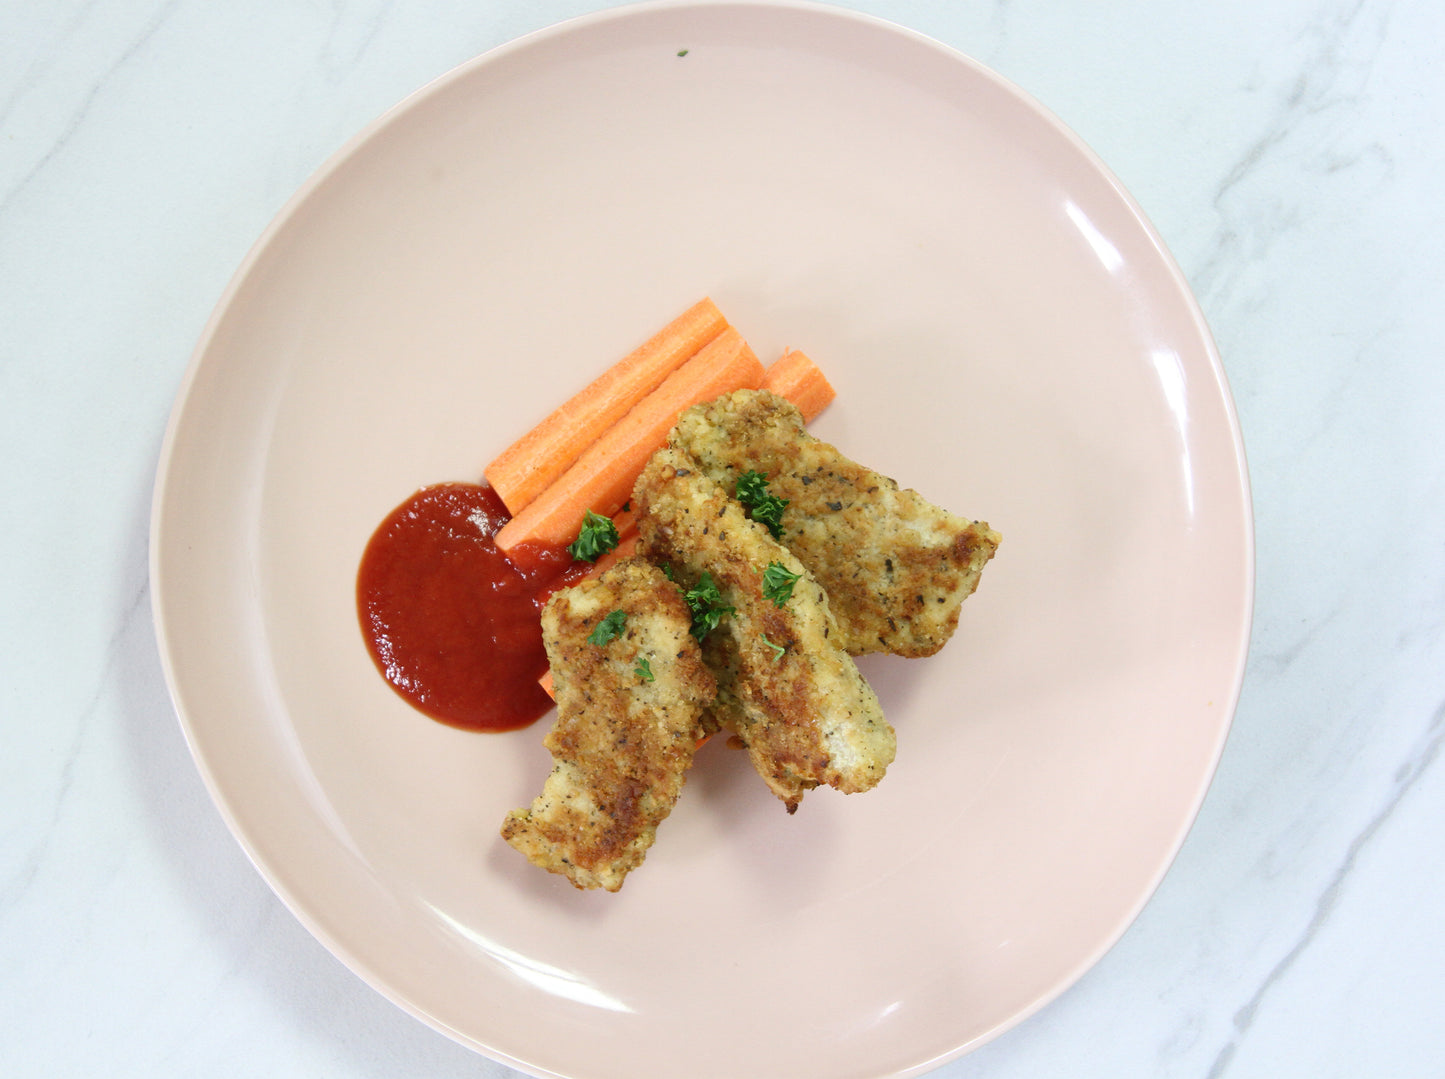 KIDS LUNCH: Chicken Tenders with Ketchup and Carrots